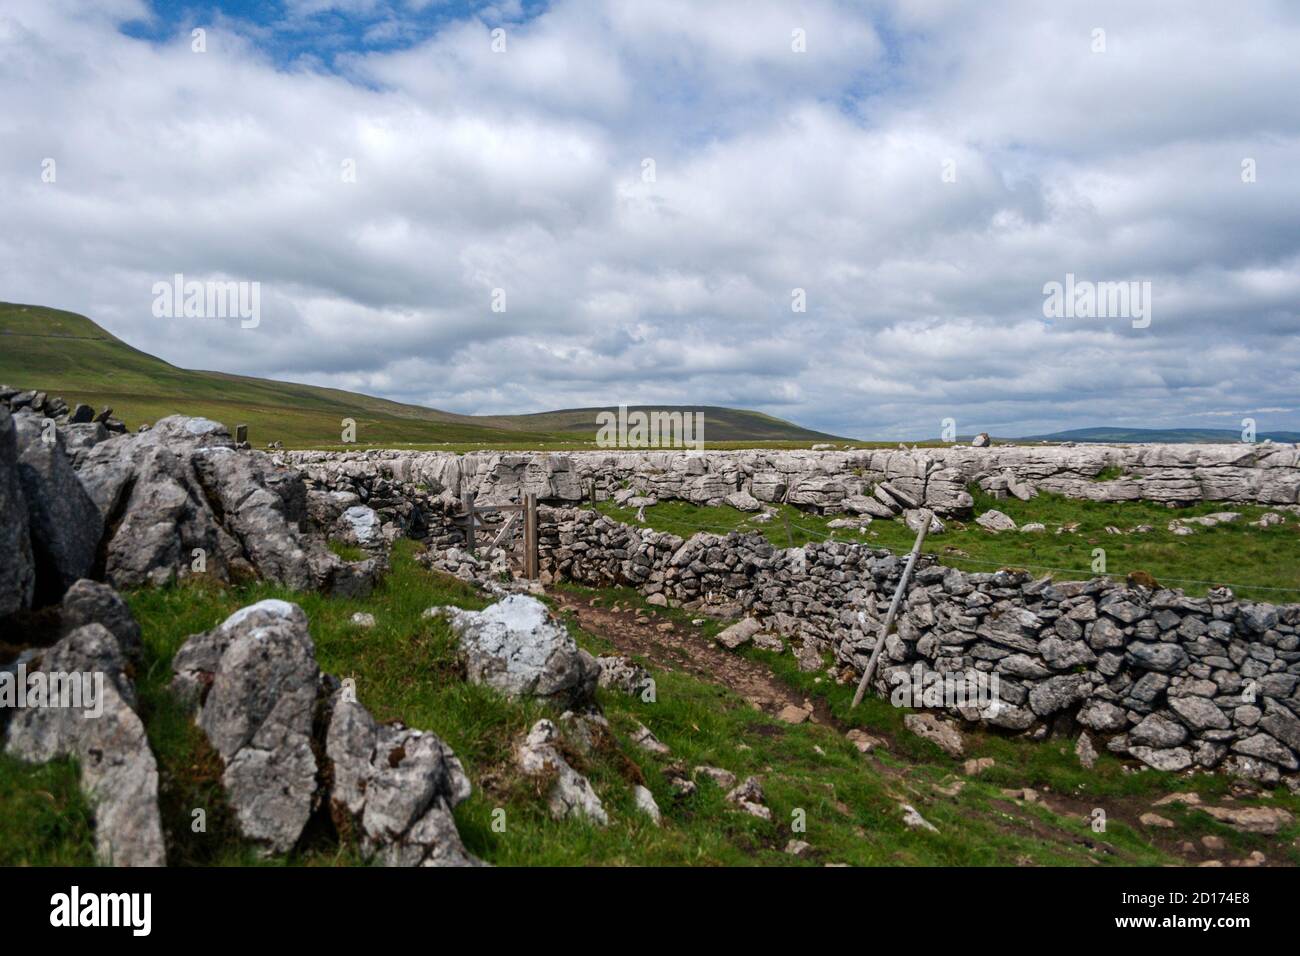 Sulber Nick. Yorkshire Dales. Stock Photo